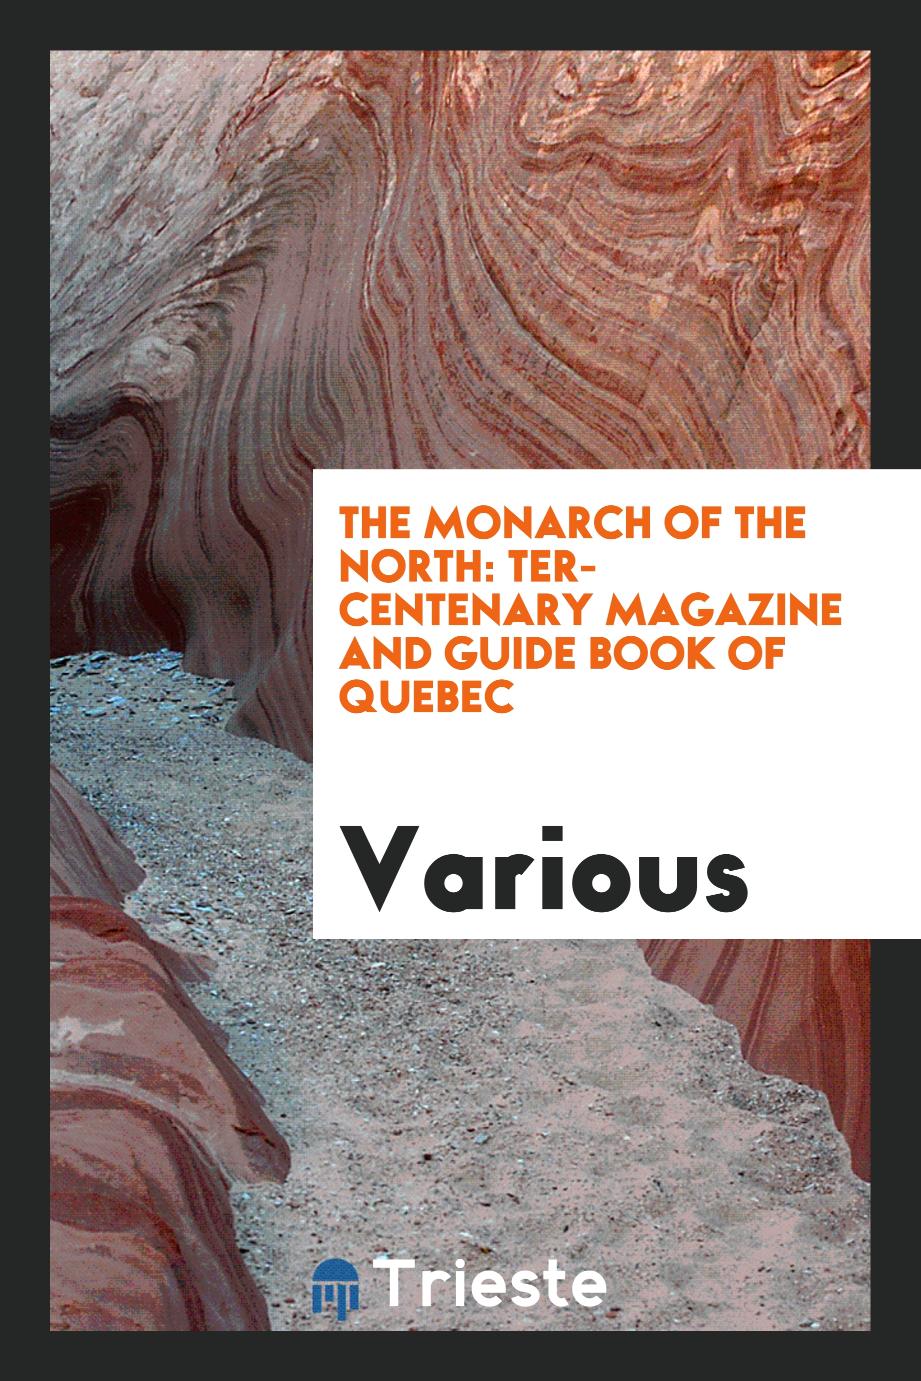 The Monarch of the north: ter-centenary magazine and guide book of Quebec